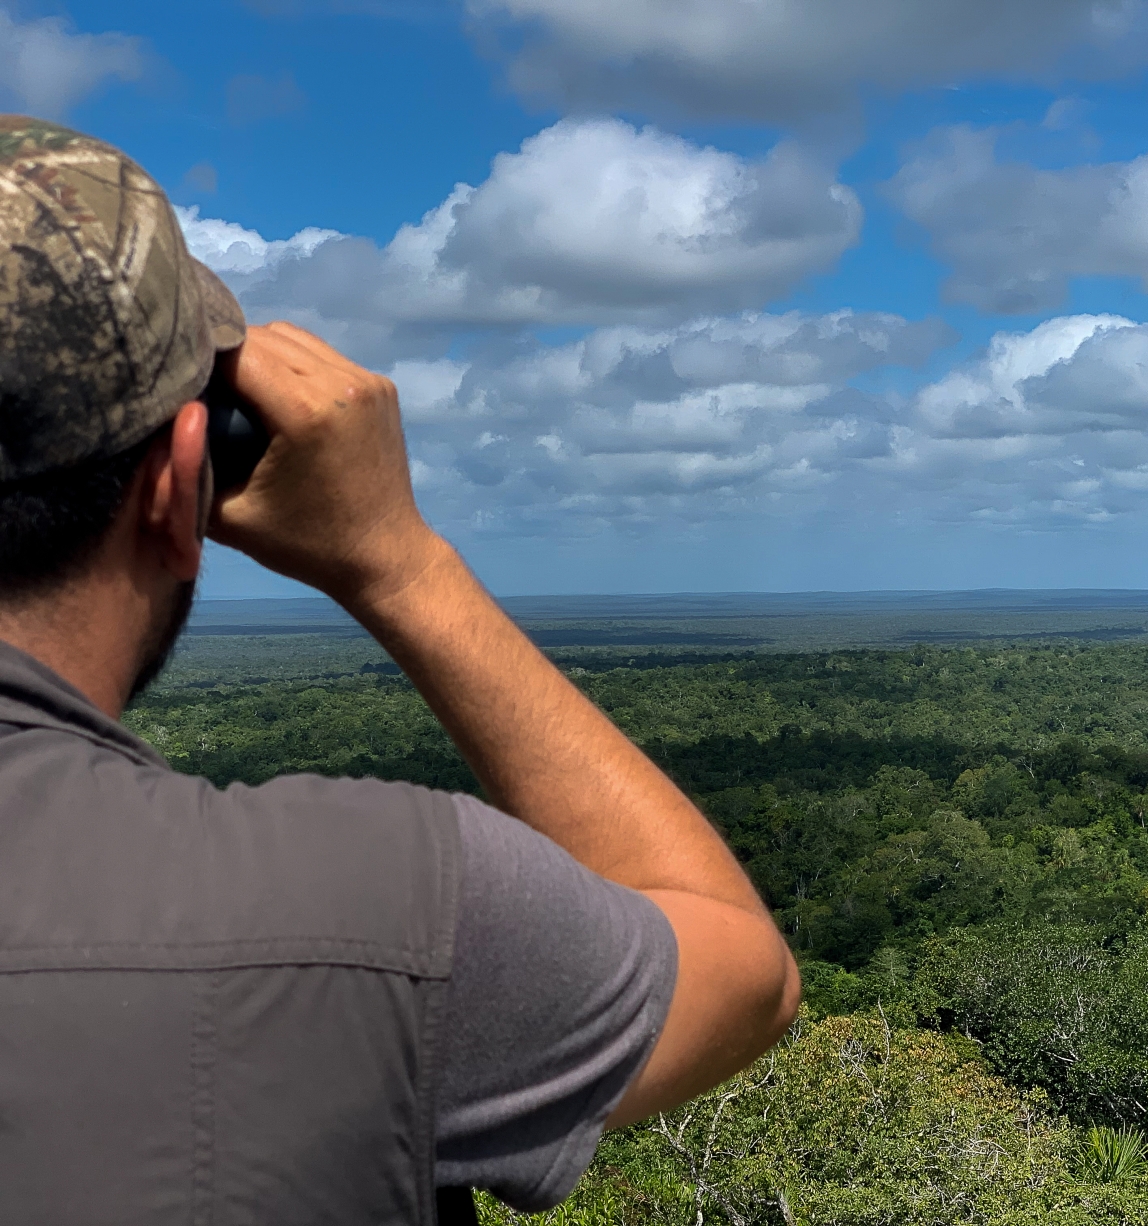 man with binoculars looking out on forest canopy 